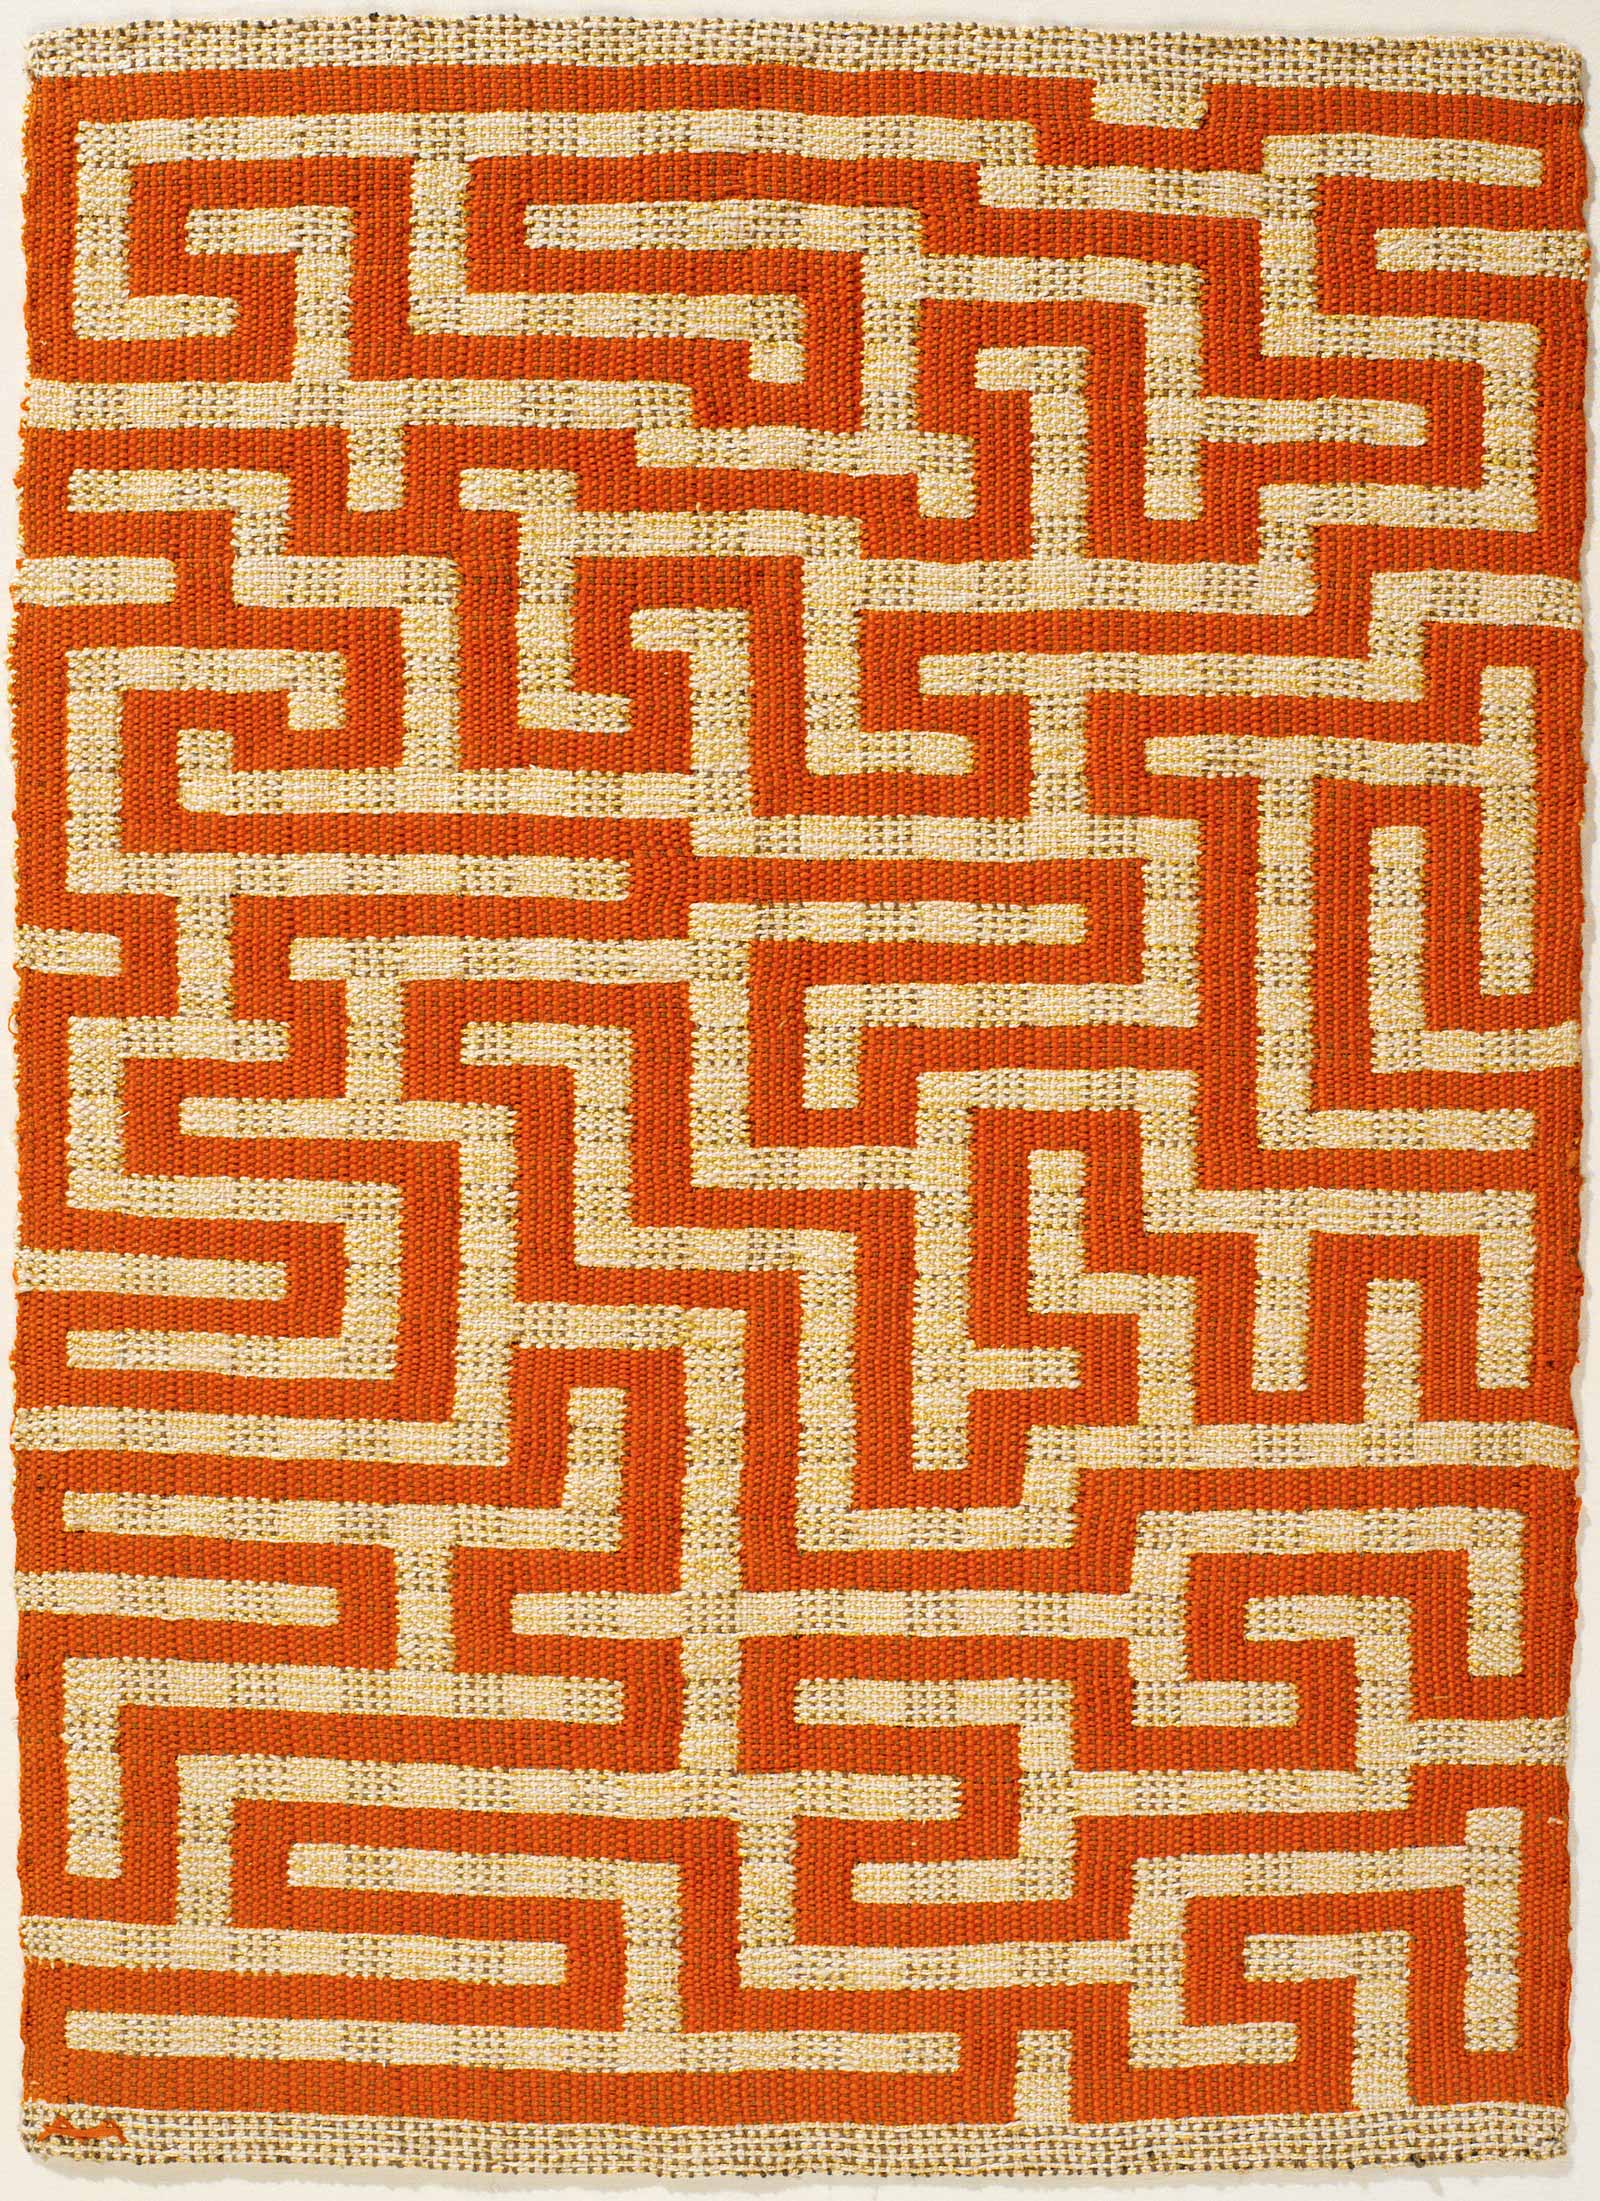 Anni Albers Red Meander